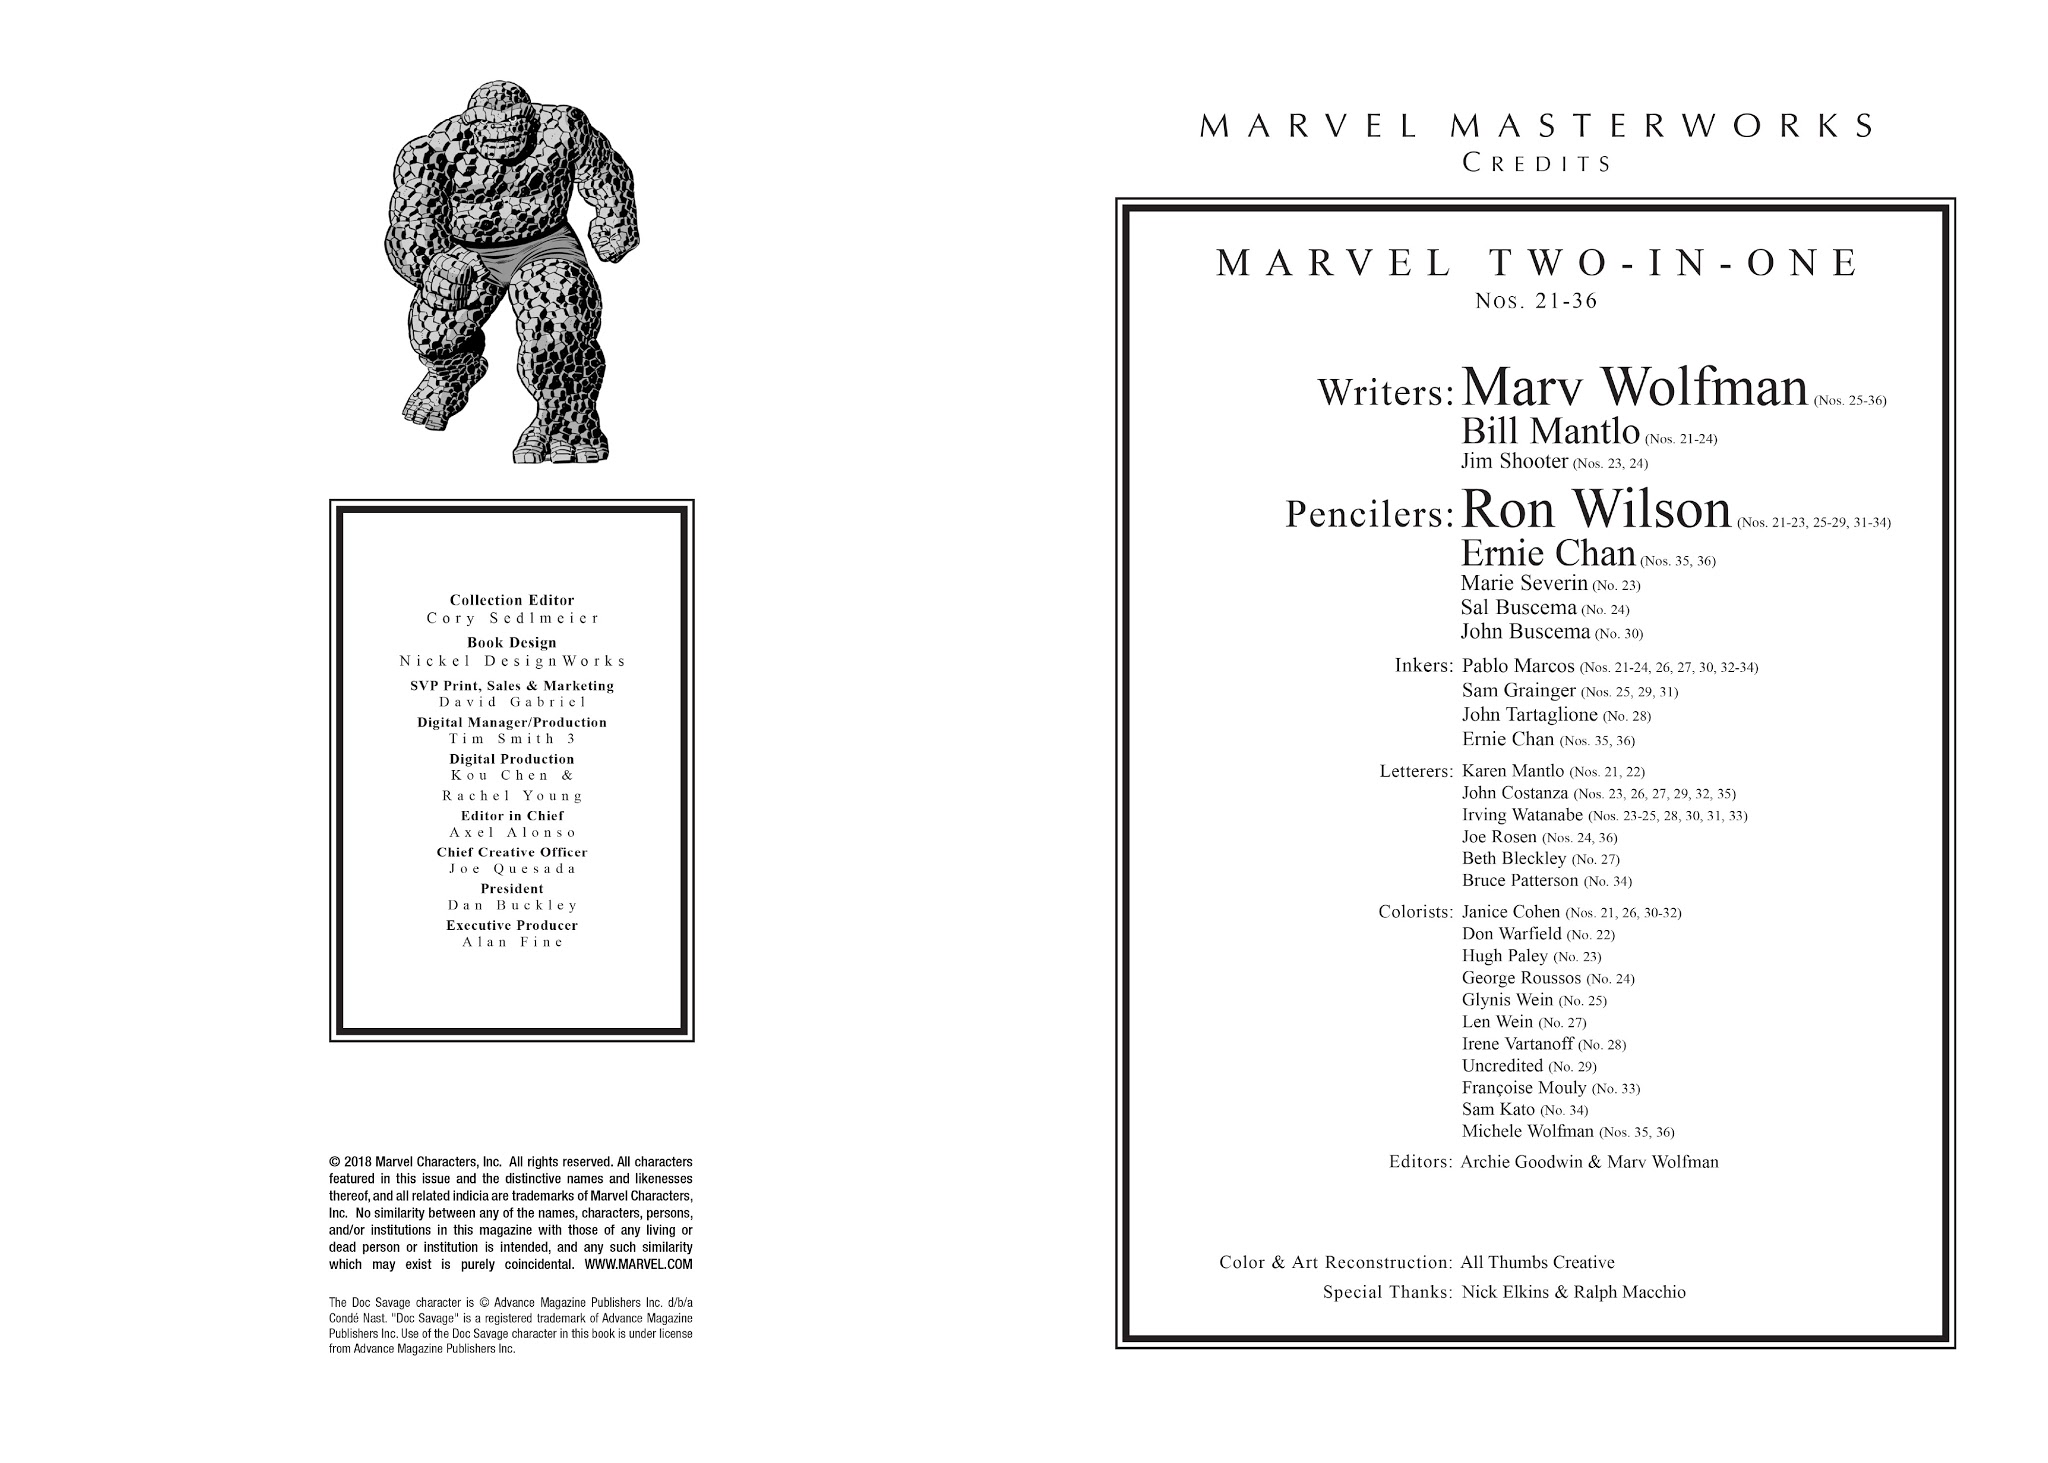 Read online Marvel Masterworks: Marvel Two-In-One comic -  Issue # TPB 3 - 3